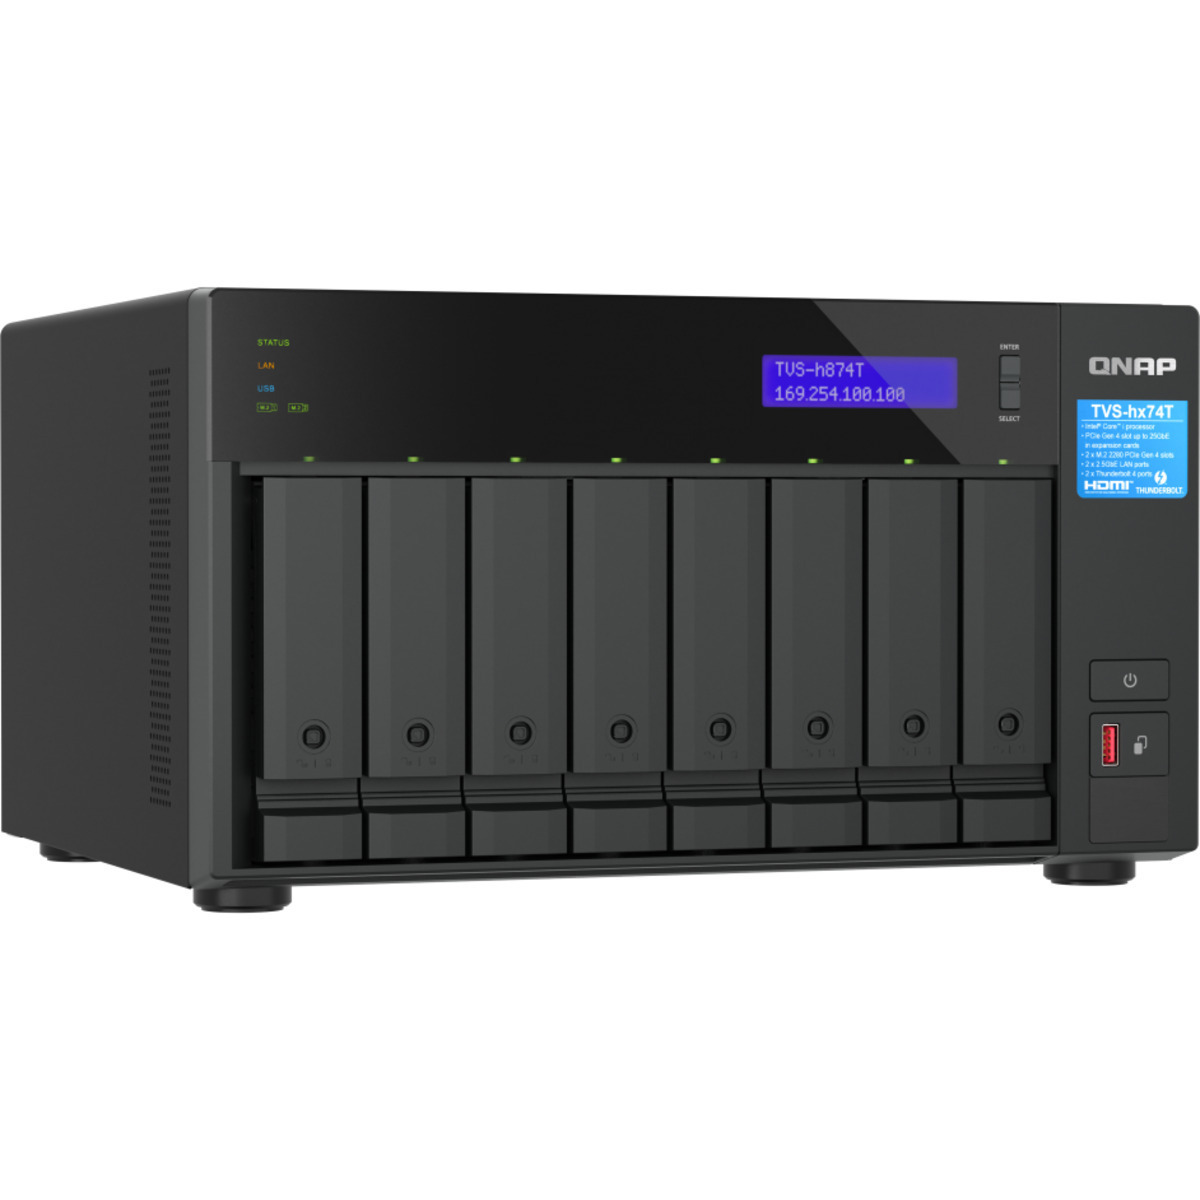 buy QNAP TVS-h874T Core i9 Thunderbolt 4 160tb Desktop DAS-NAS - Combo Direct + Network Storage Device 8x20000gb Western Digital Ultrastar HC560 WUH722020ALE6L4 3.5 7200rpm SATA 6Gb/s HDD ENTERPRISE Class Drives Installed - Burn-In Tested - nas headquarters buy network attached storage server device das new raid-5 free shipping simply usa christmas holiday black friday cyber monday week sale happening now! TVS-h874T Core i9 Thunderbolt 4